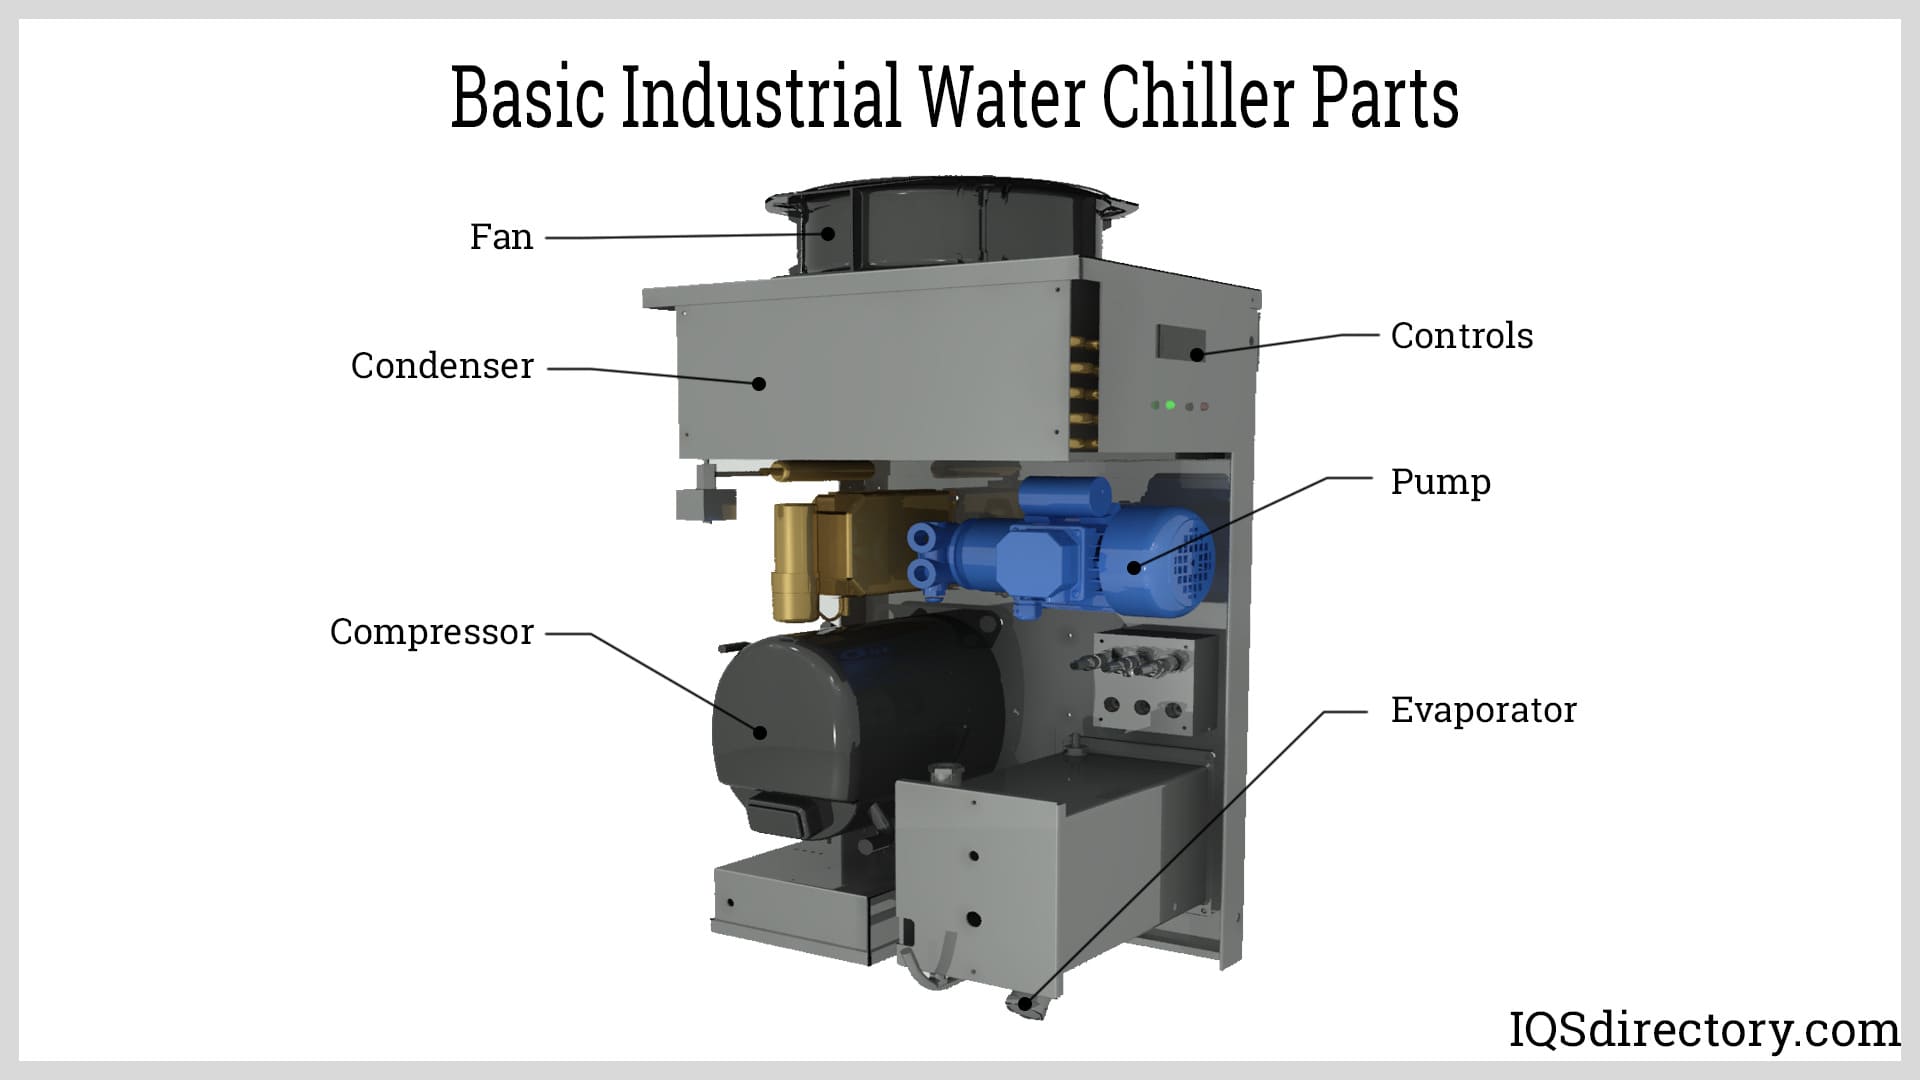 Basic Industrial Water Chiller Parts